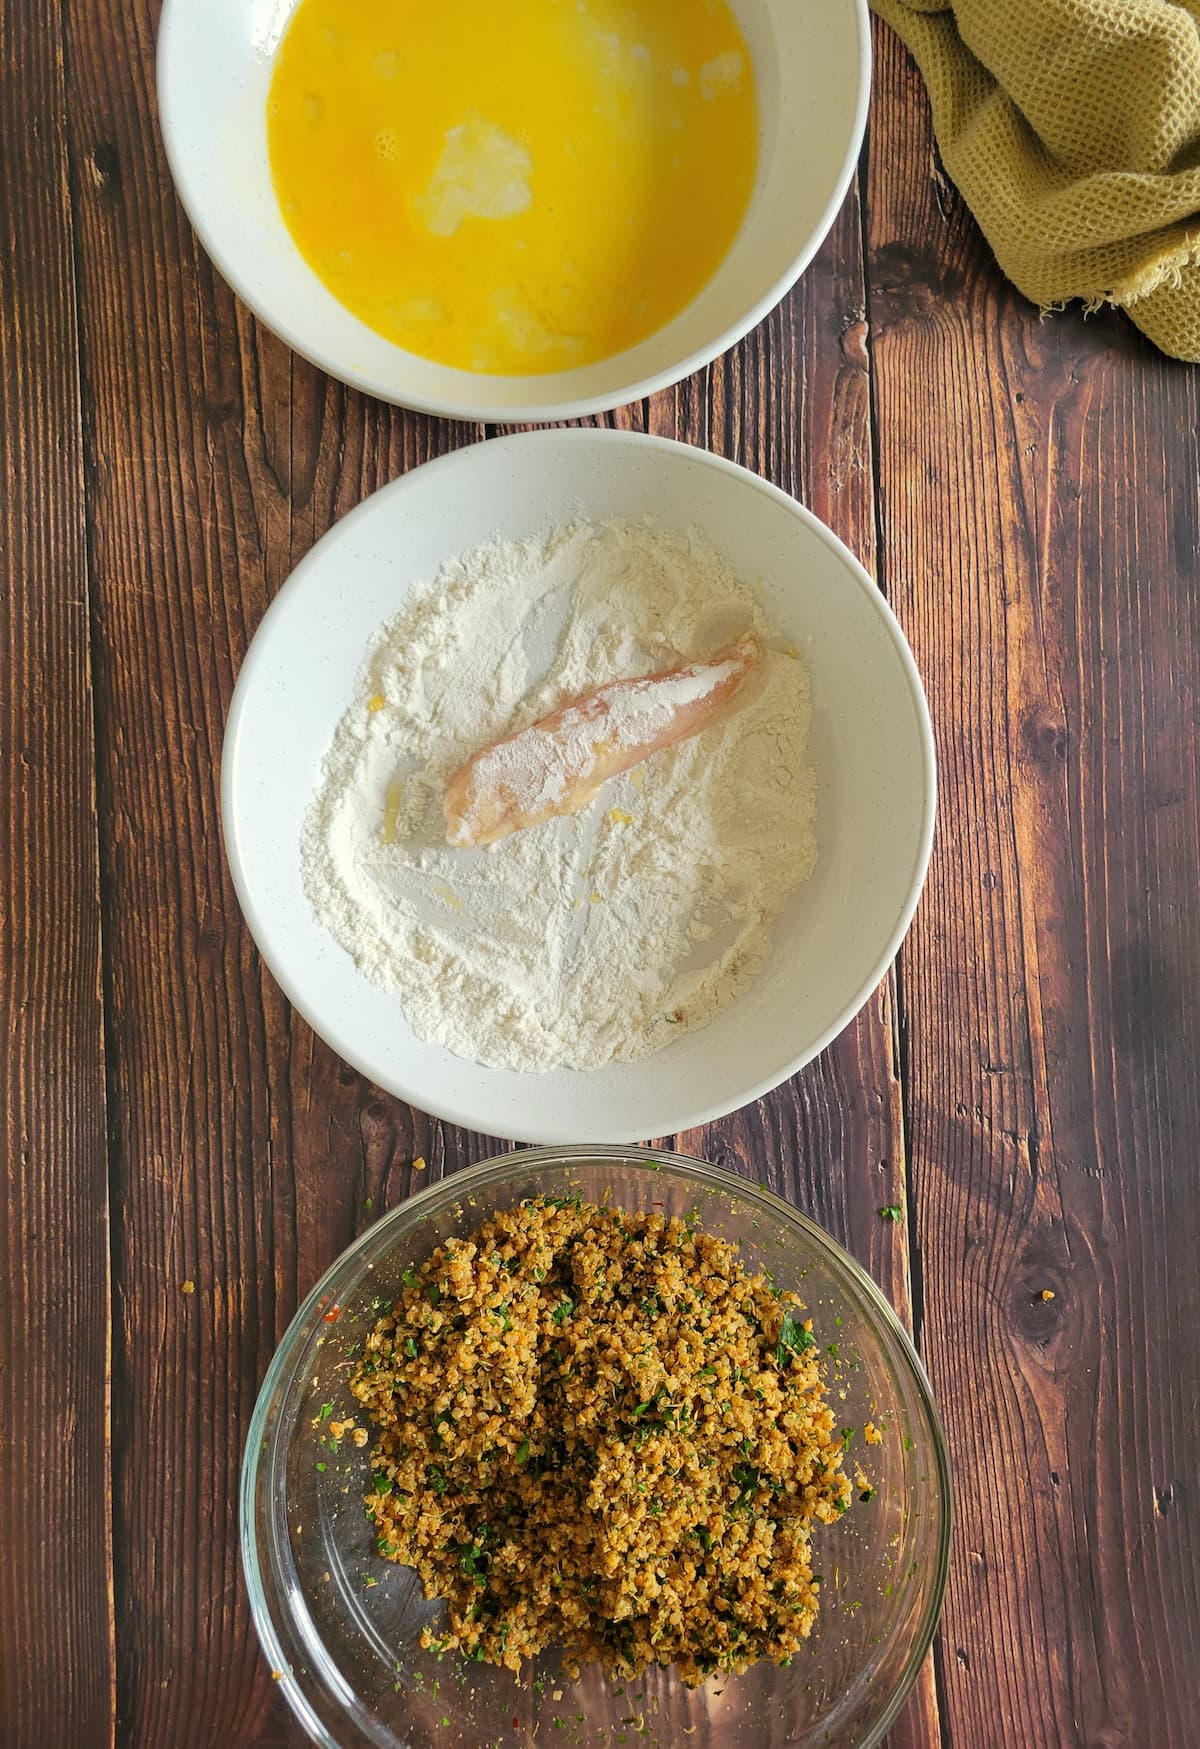 3 bowls - one of beaten egg, one of flour and one of a quinoa coating mixture, chicken tender in the bowl of flour